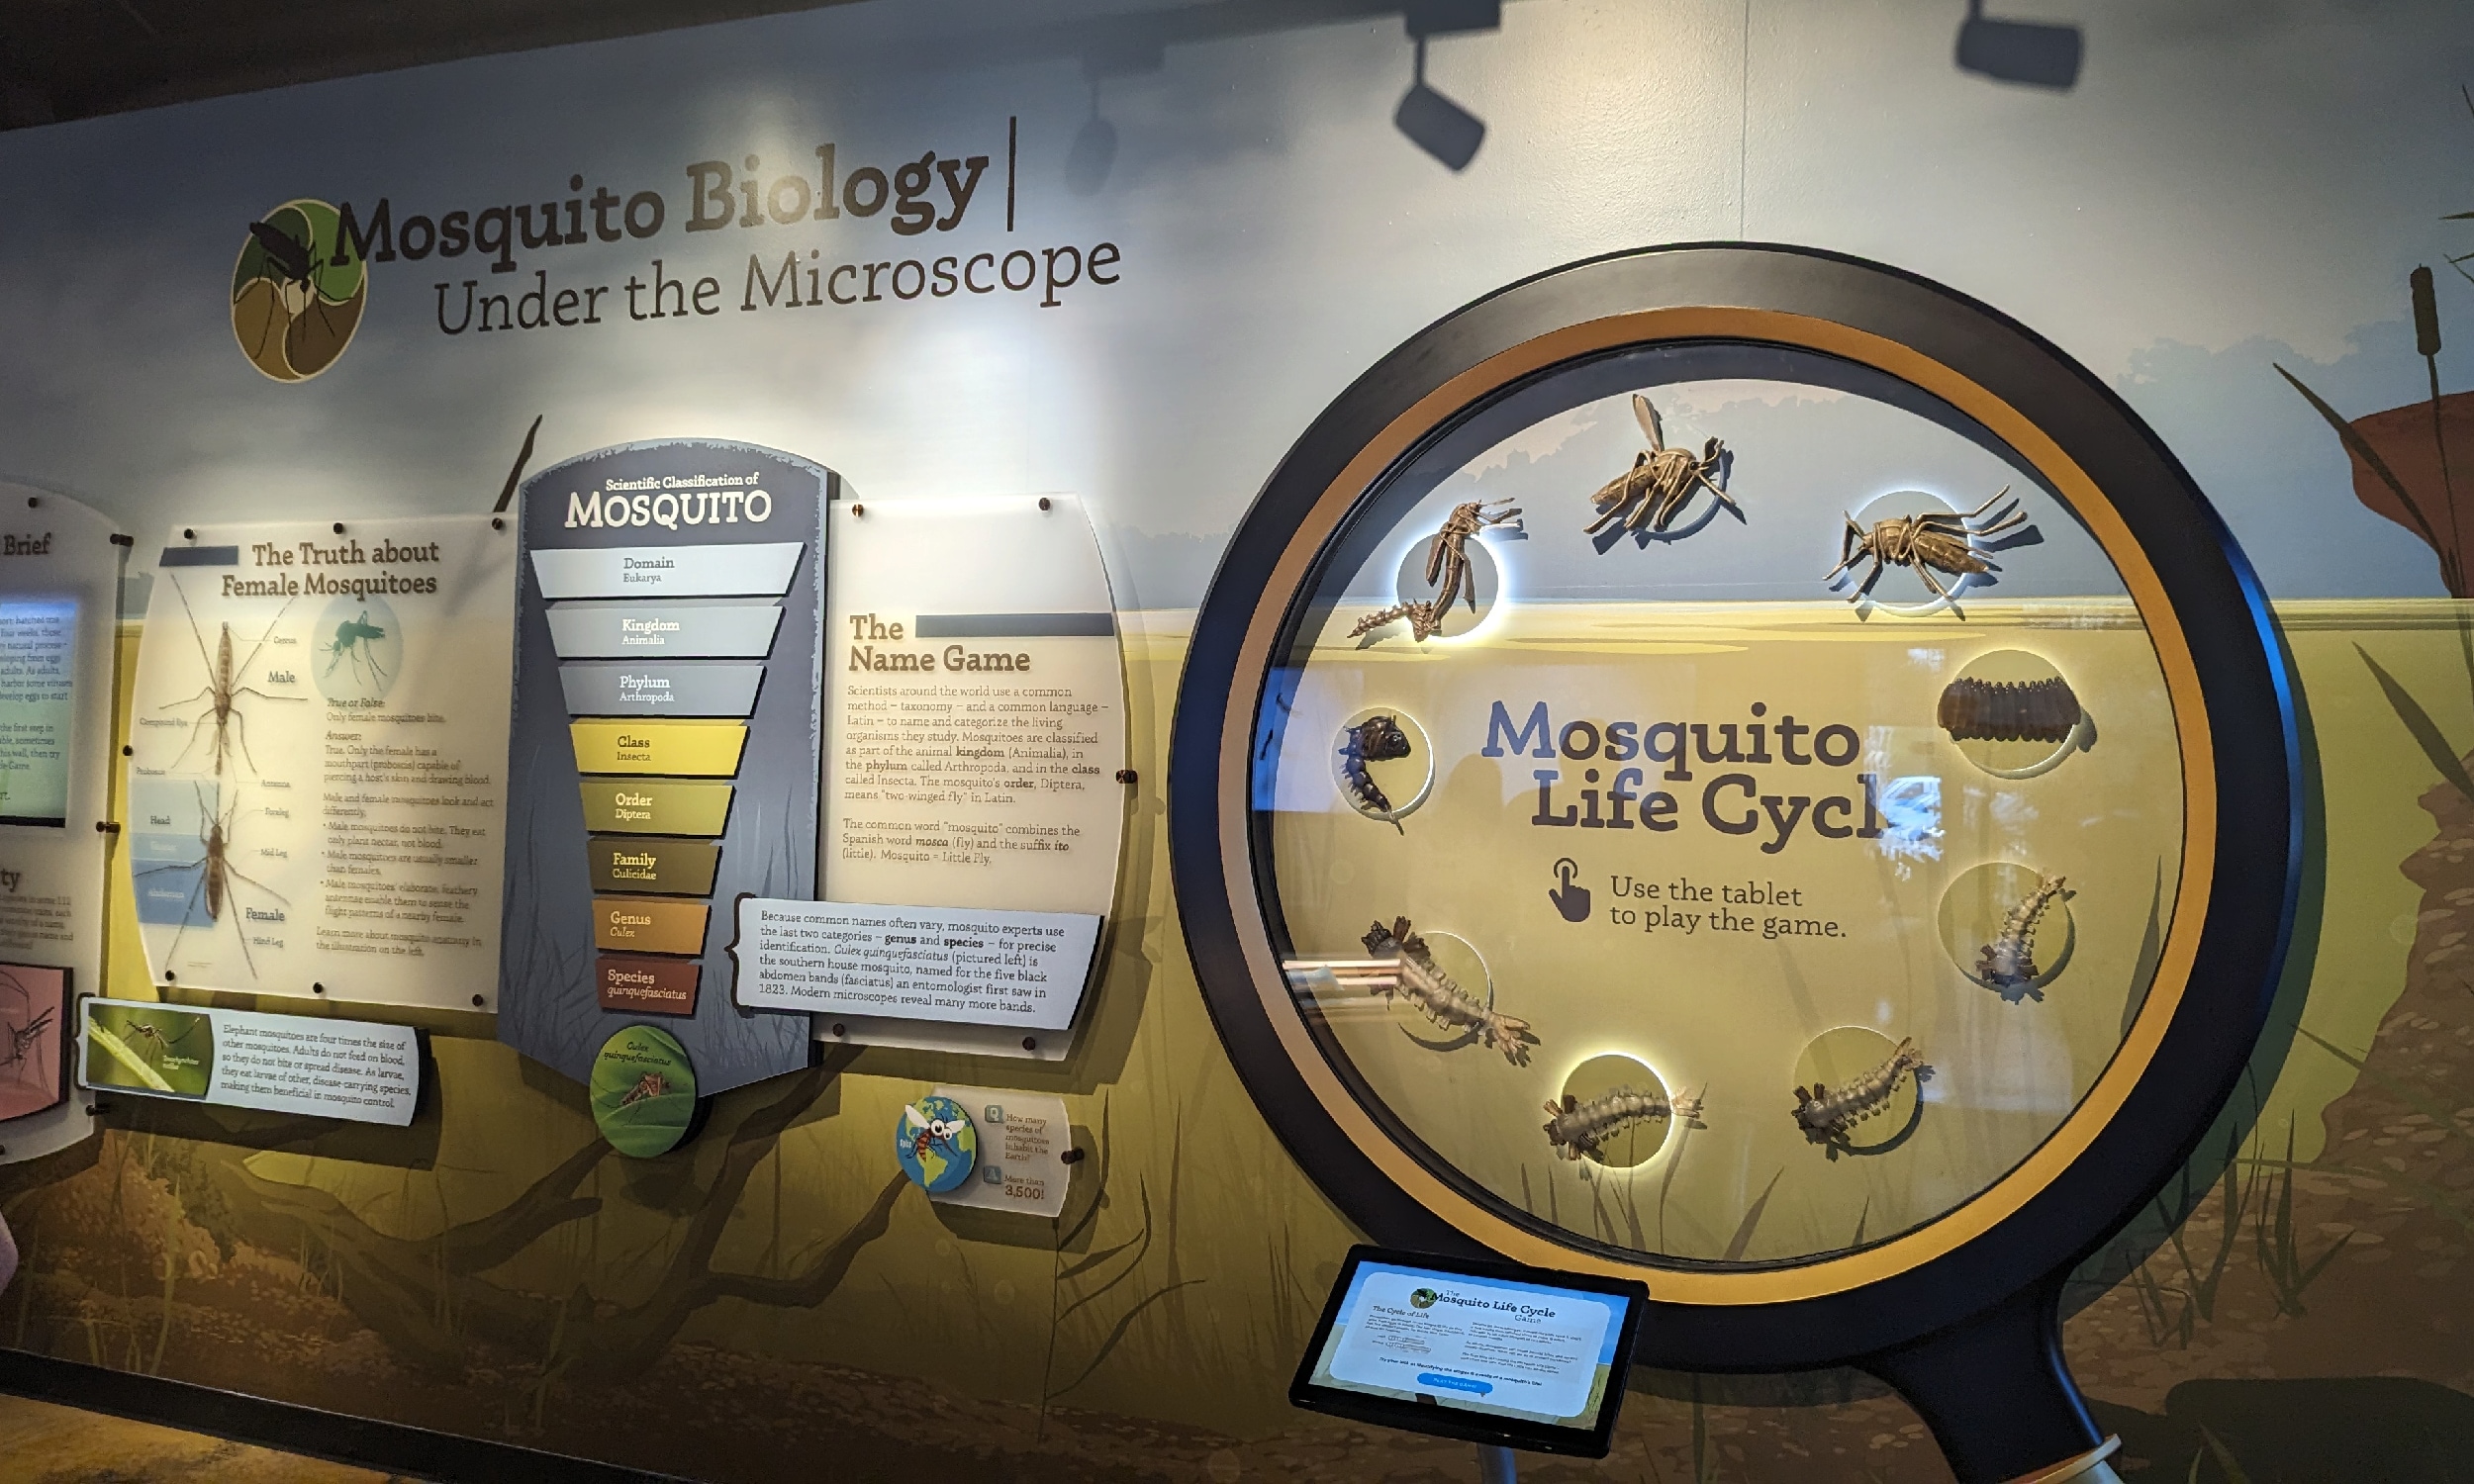 The life-cycle of a mosquito is taught using this interactive wall exhibit